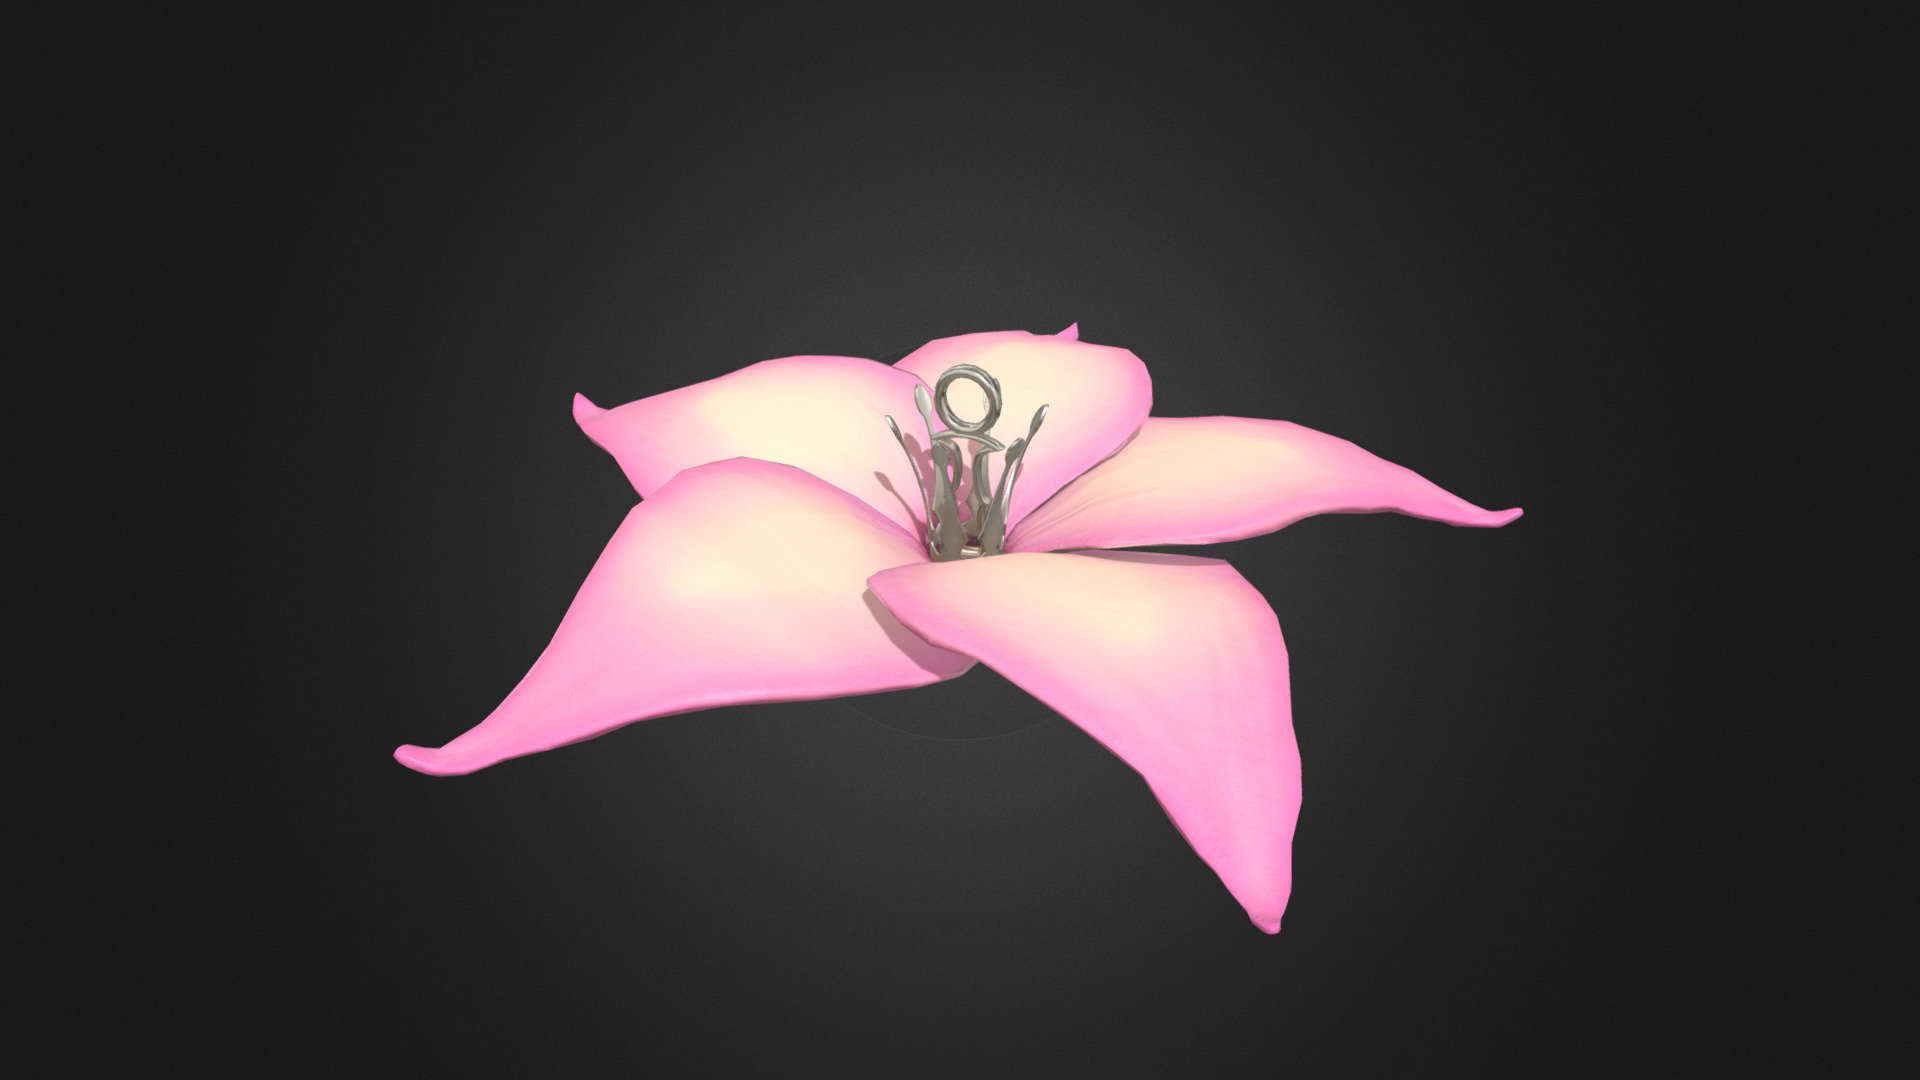 Zero's eye flower from drakengard 3.
A little bit revisited to be between the eye version and the final boss version 3d model